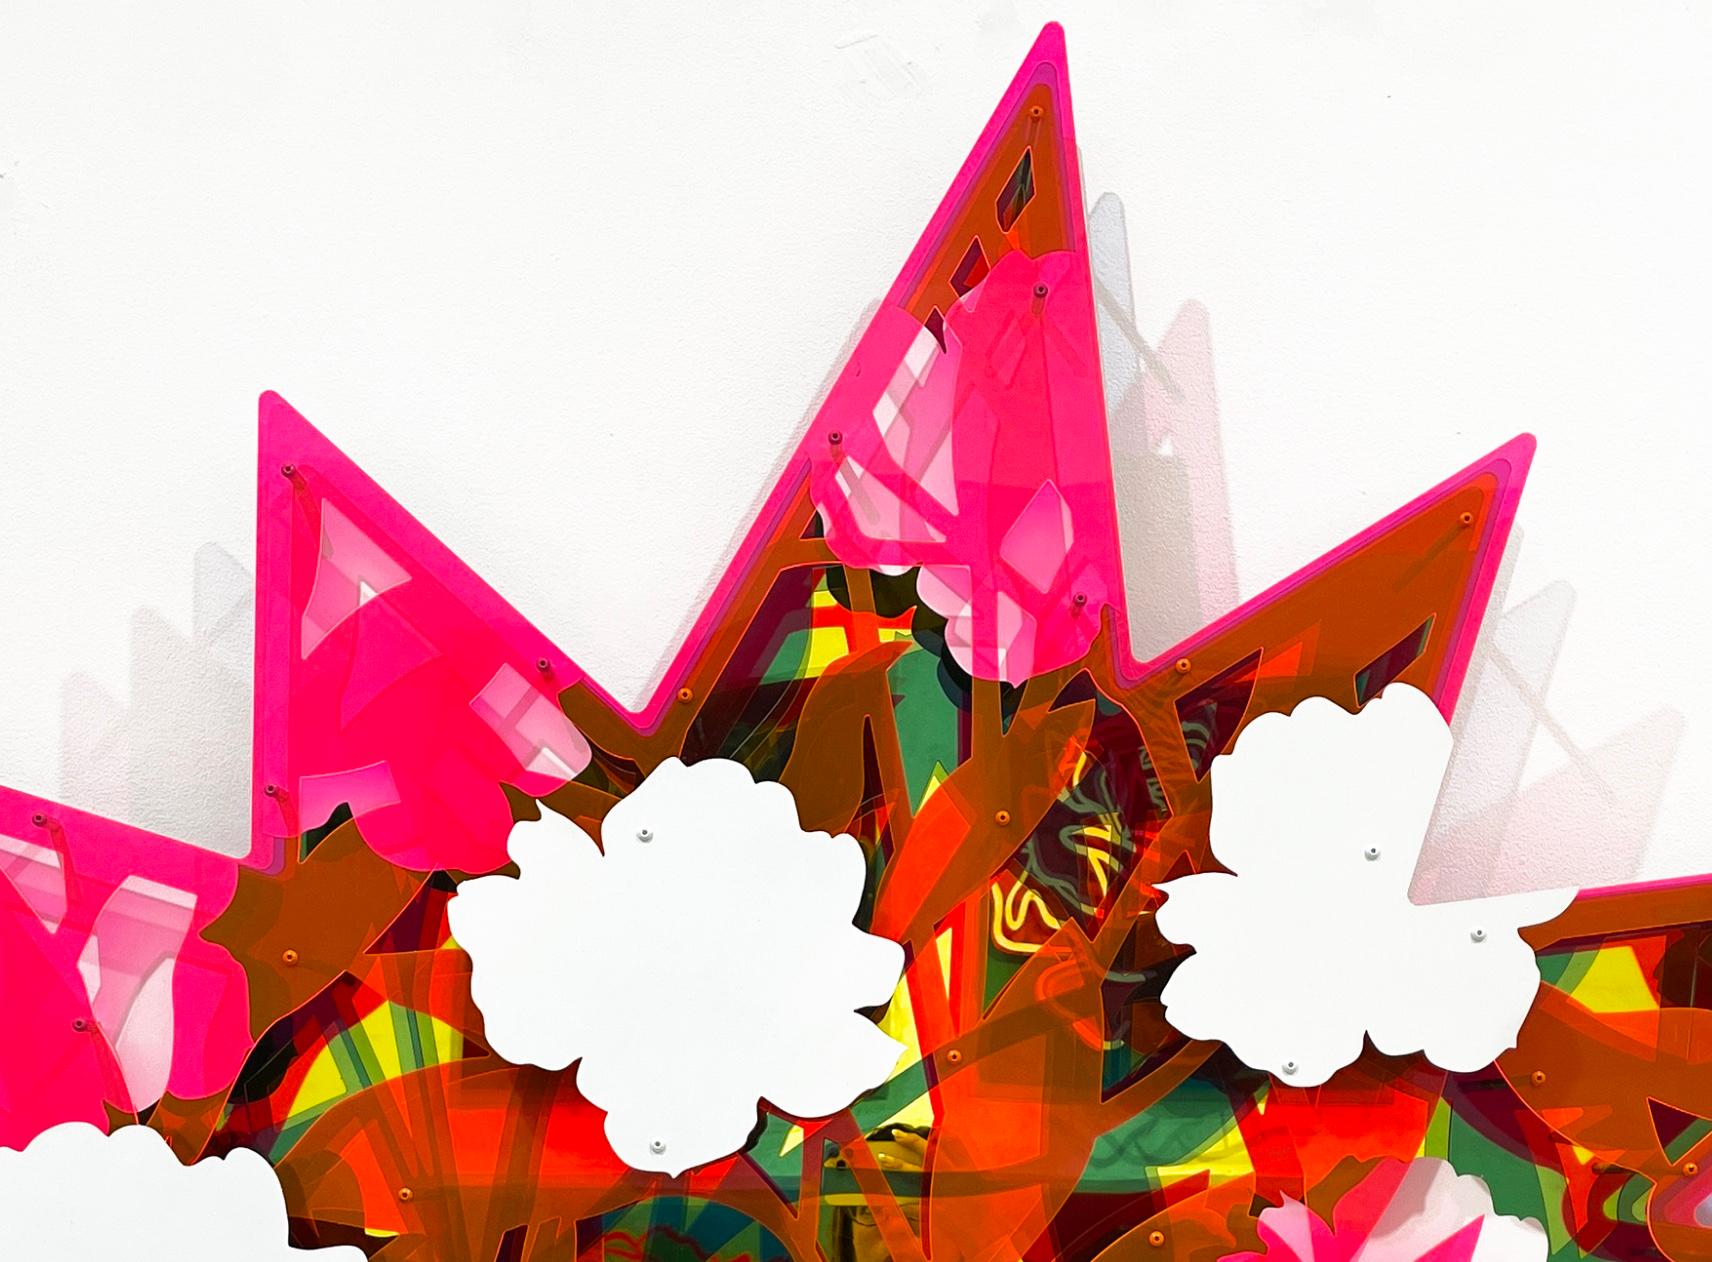 Floral Abstract POW Neon Pink on Blue - Sculpture by Michael Kalish